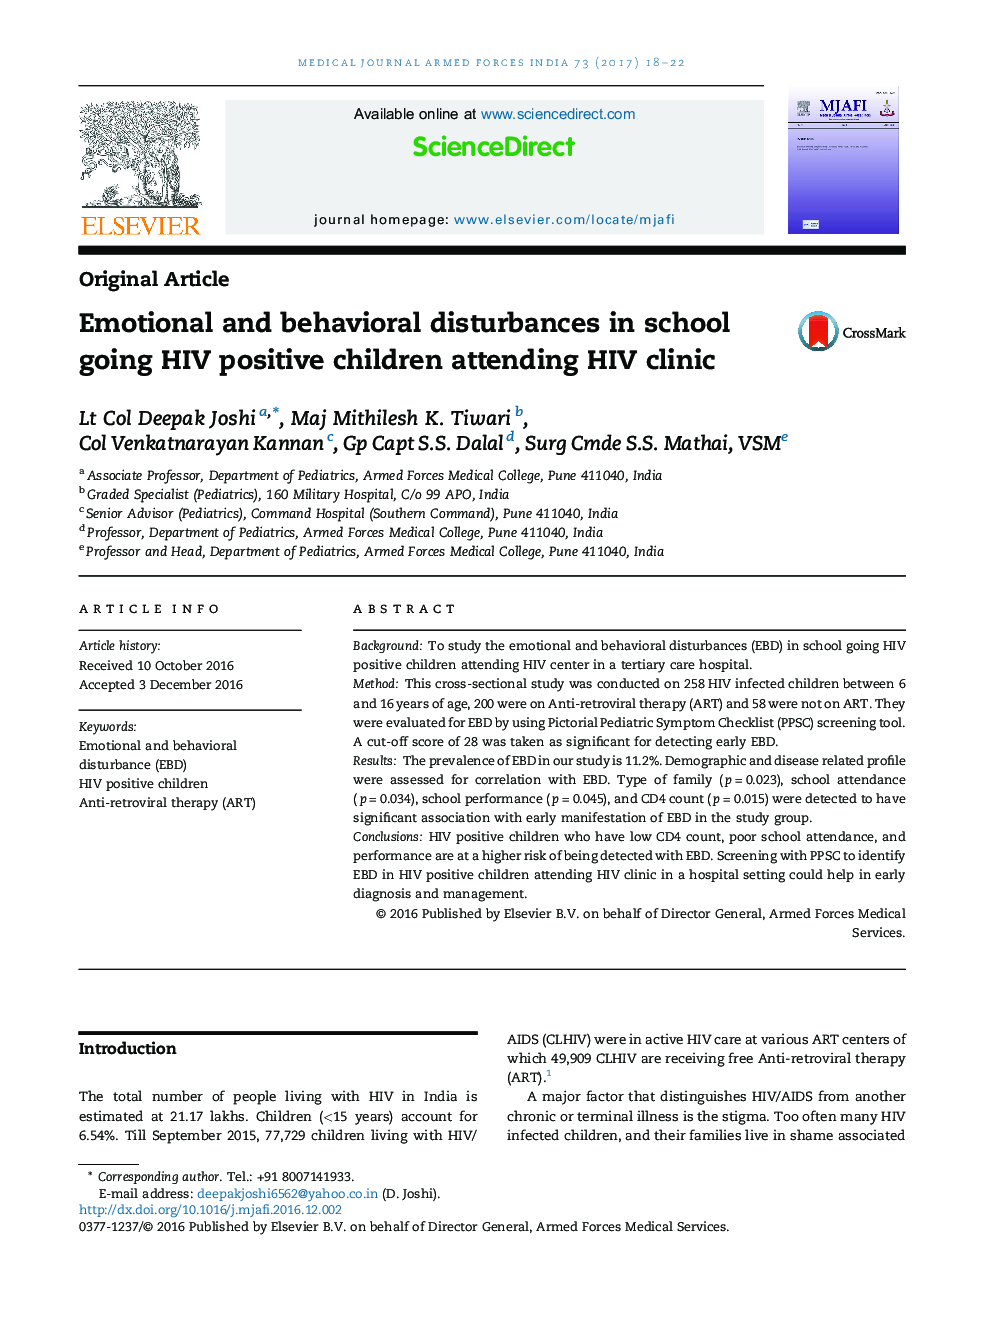 Emotional and behavioral disturbances in school going HIV positive children attending HIV clinic